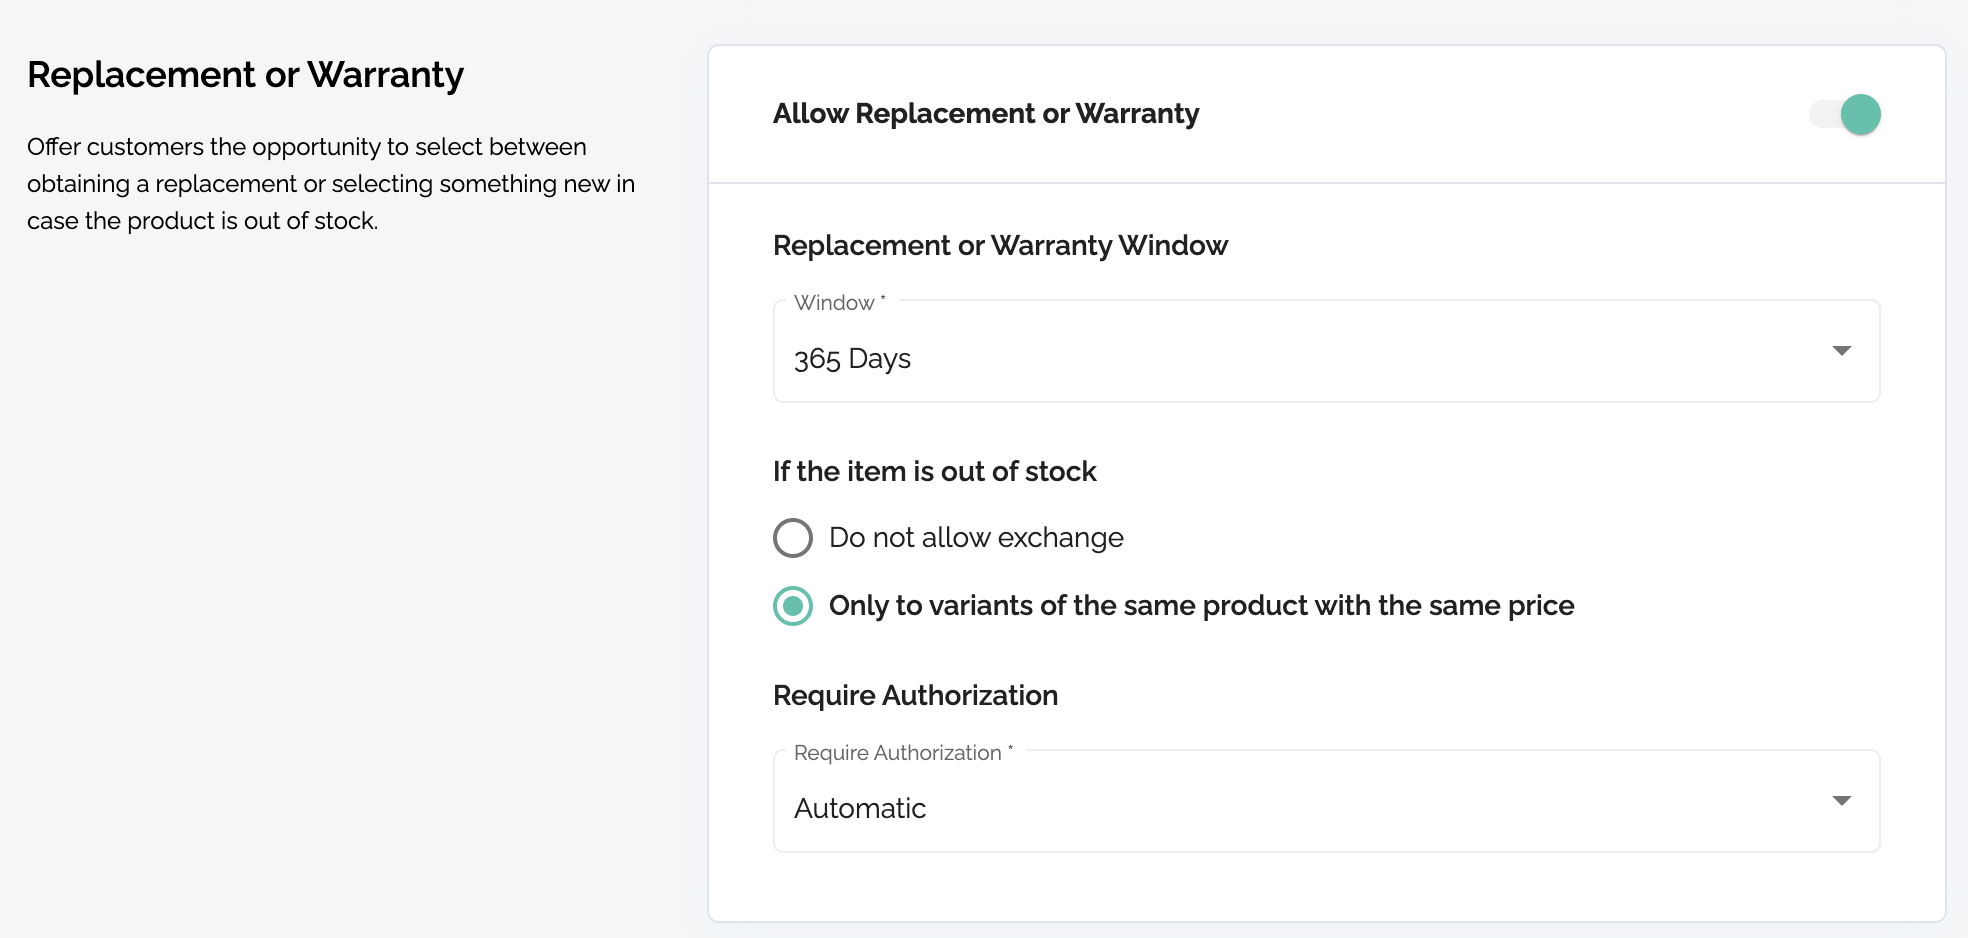 Extended Warranty replacement for out of stock items